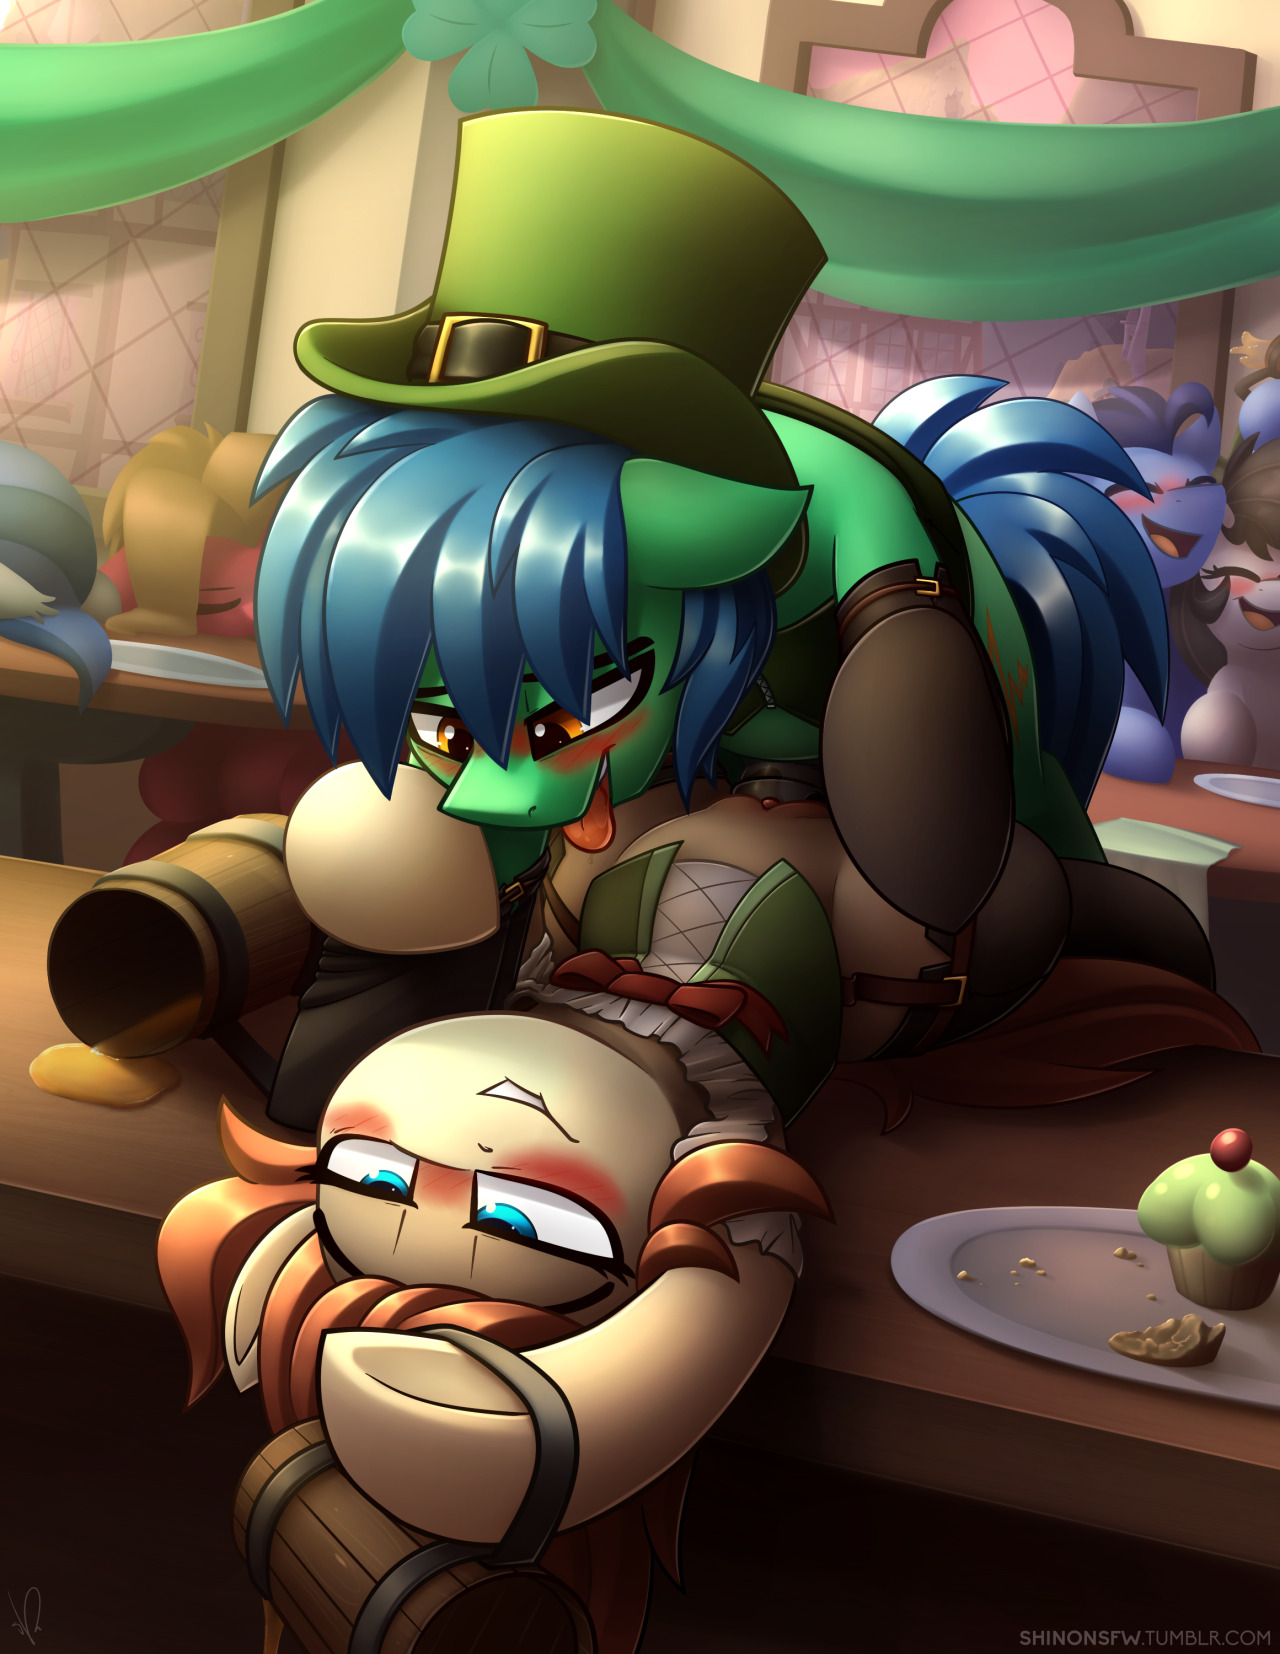 shinonsfw:Happy St. Patrick’s day! Birthday gift for two friends of mineX: